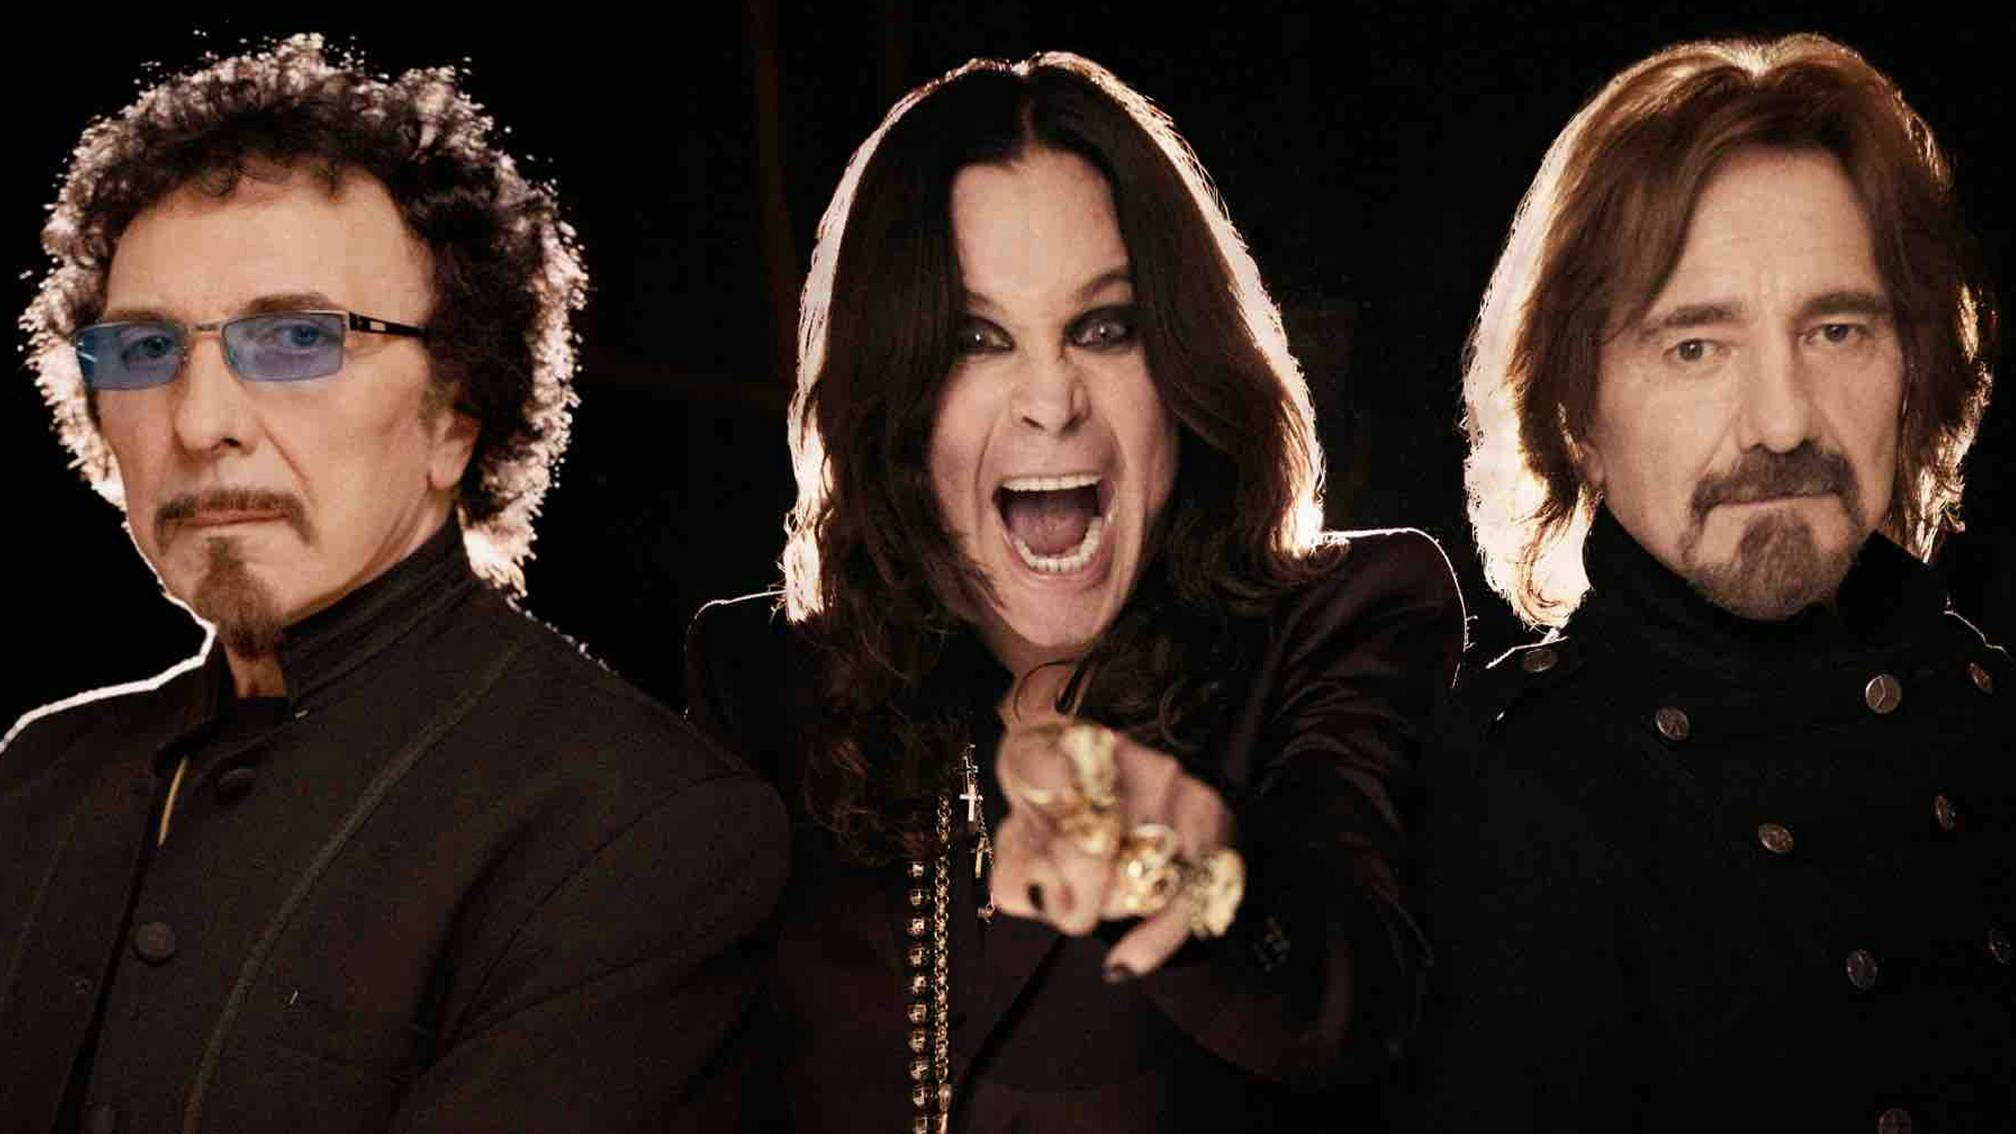 Ozzy Osbourne On Potential Black Sabbath Reunion Gigs: "Not For Me. It’s Done"